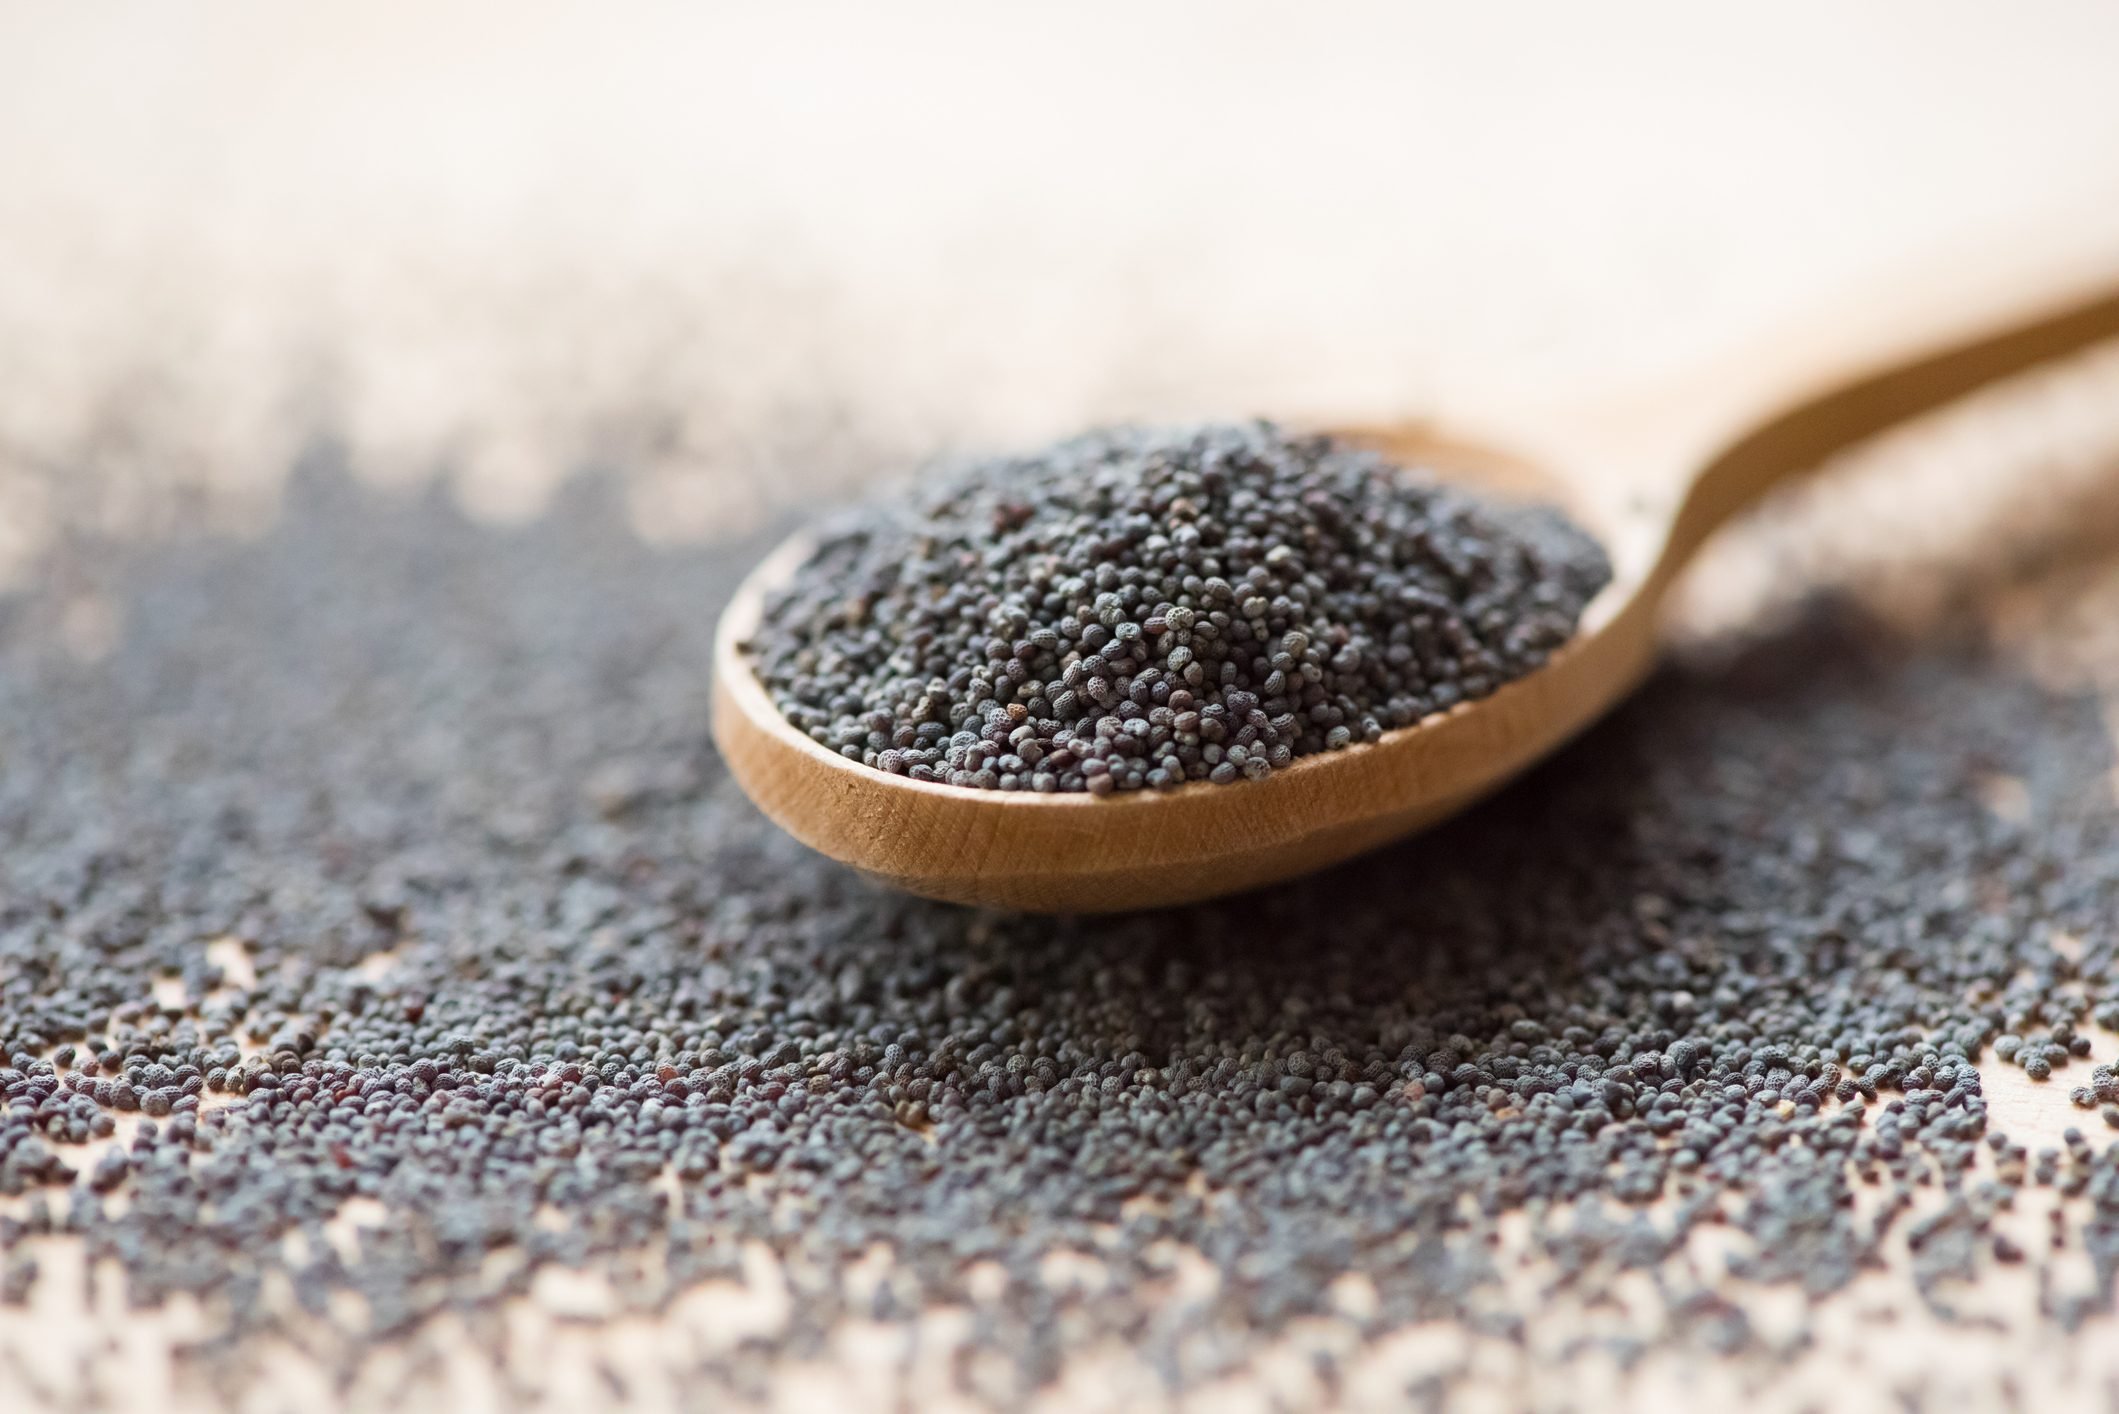 Eating Poppy Seeds? Here Are the Health Benefits, Nutrition, and Risks